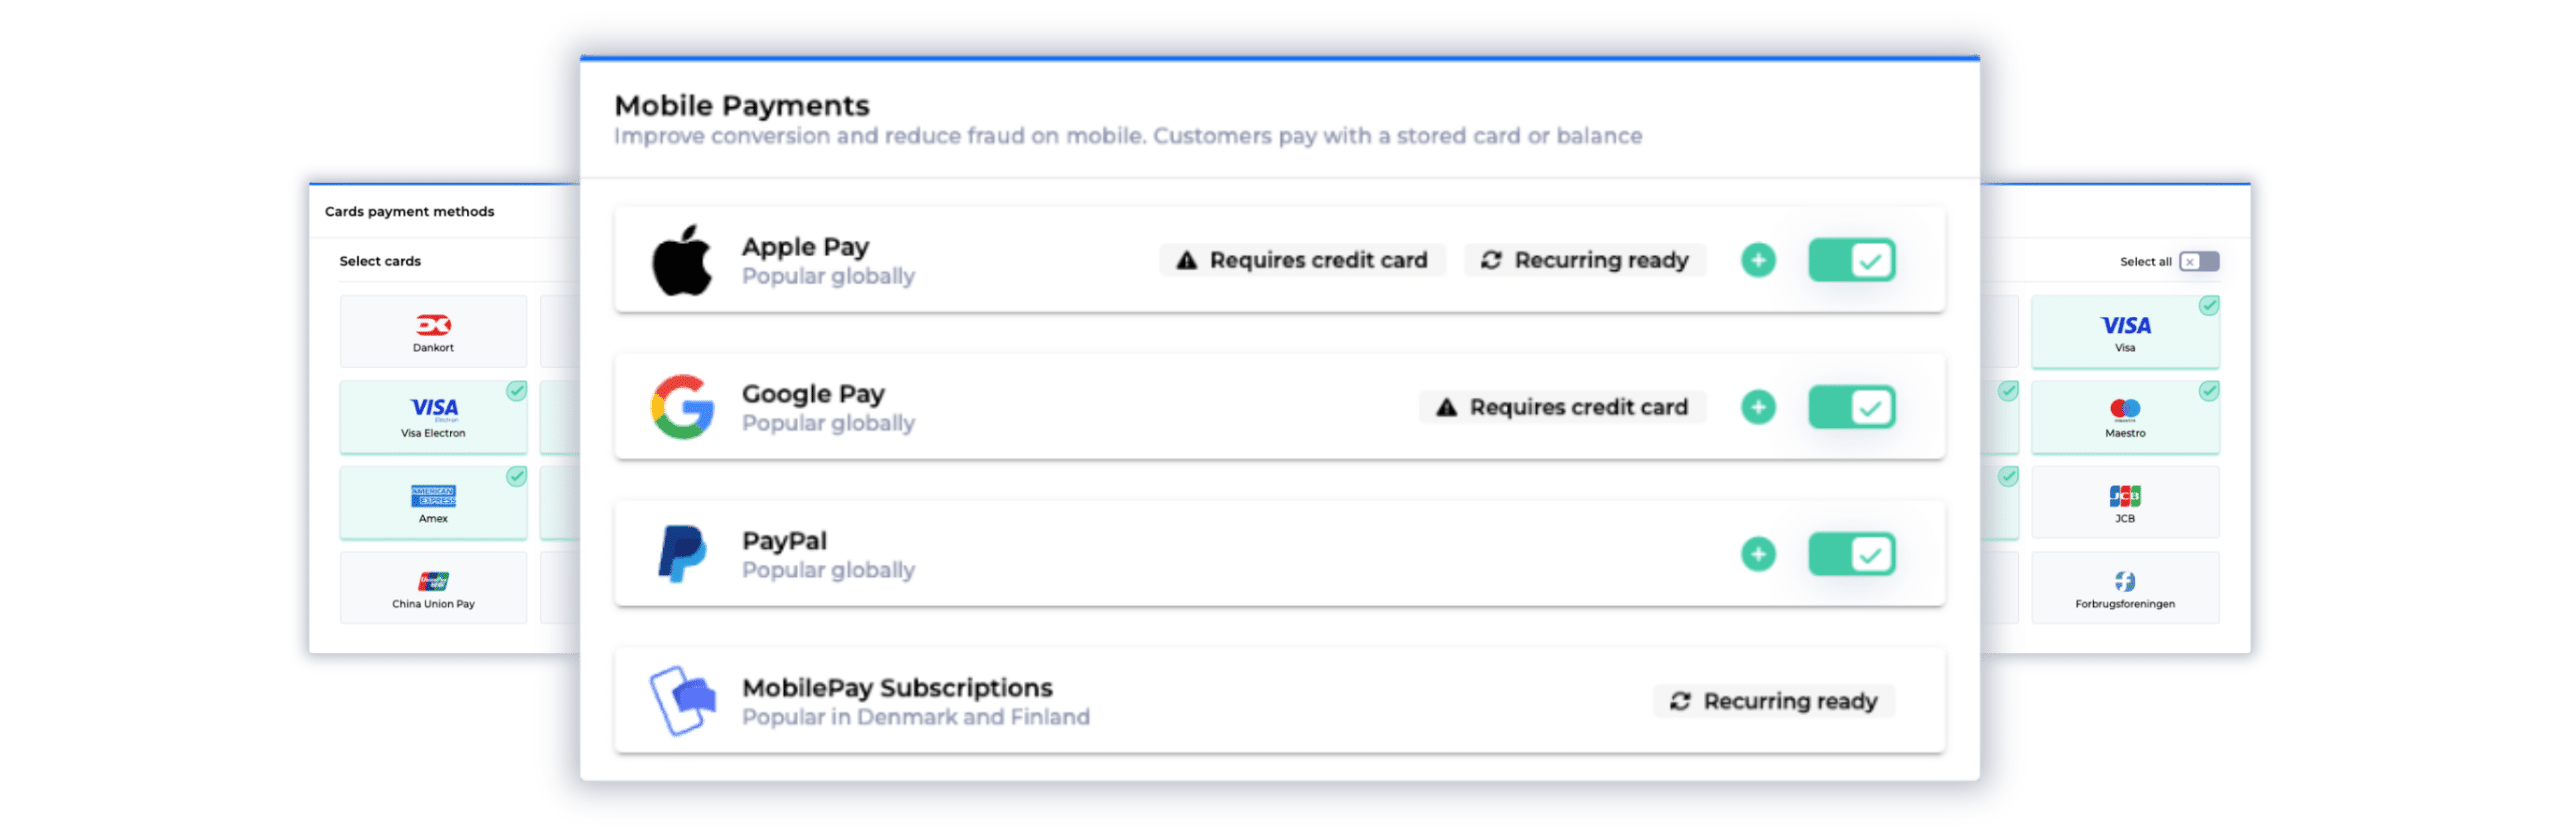 Billwerk+ Pay mobile payments screenshot and credit cards